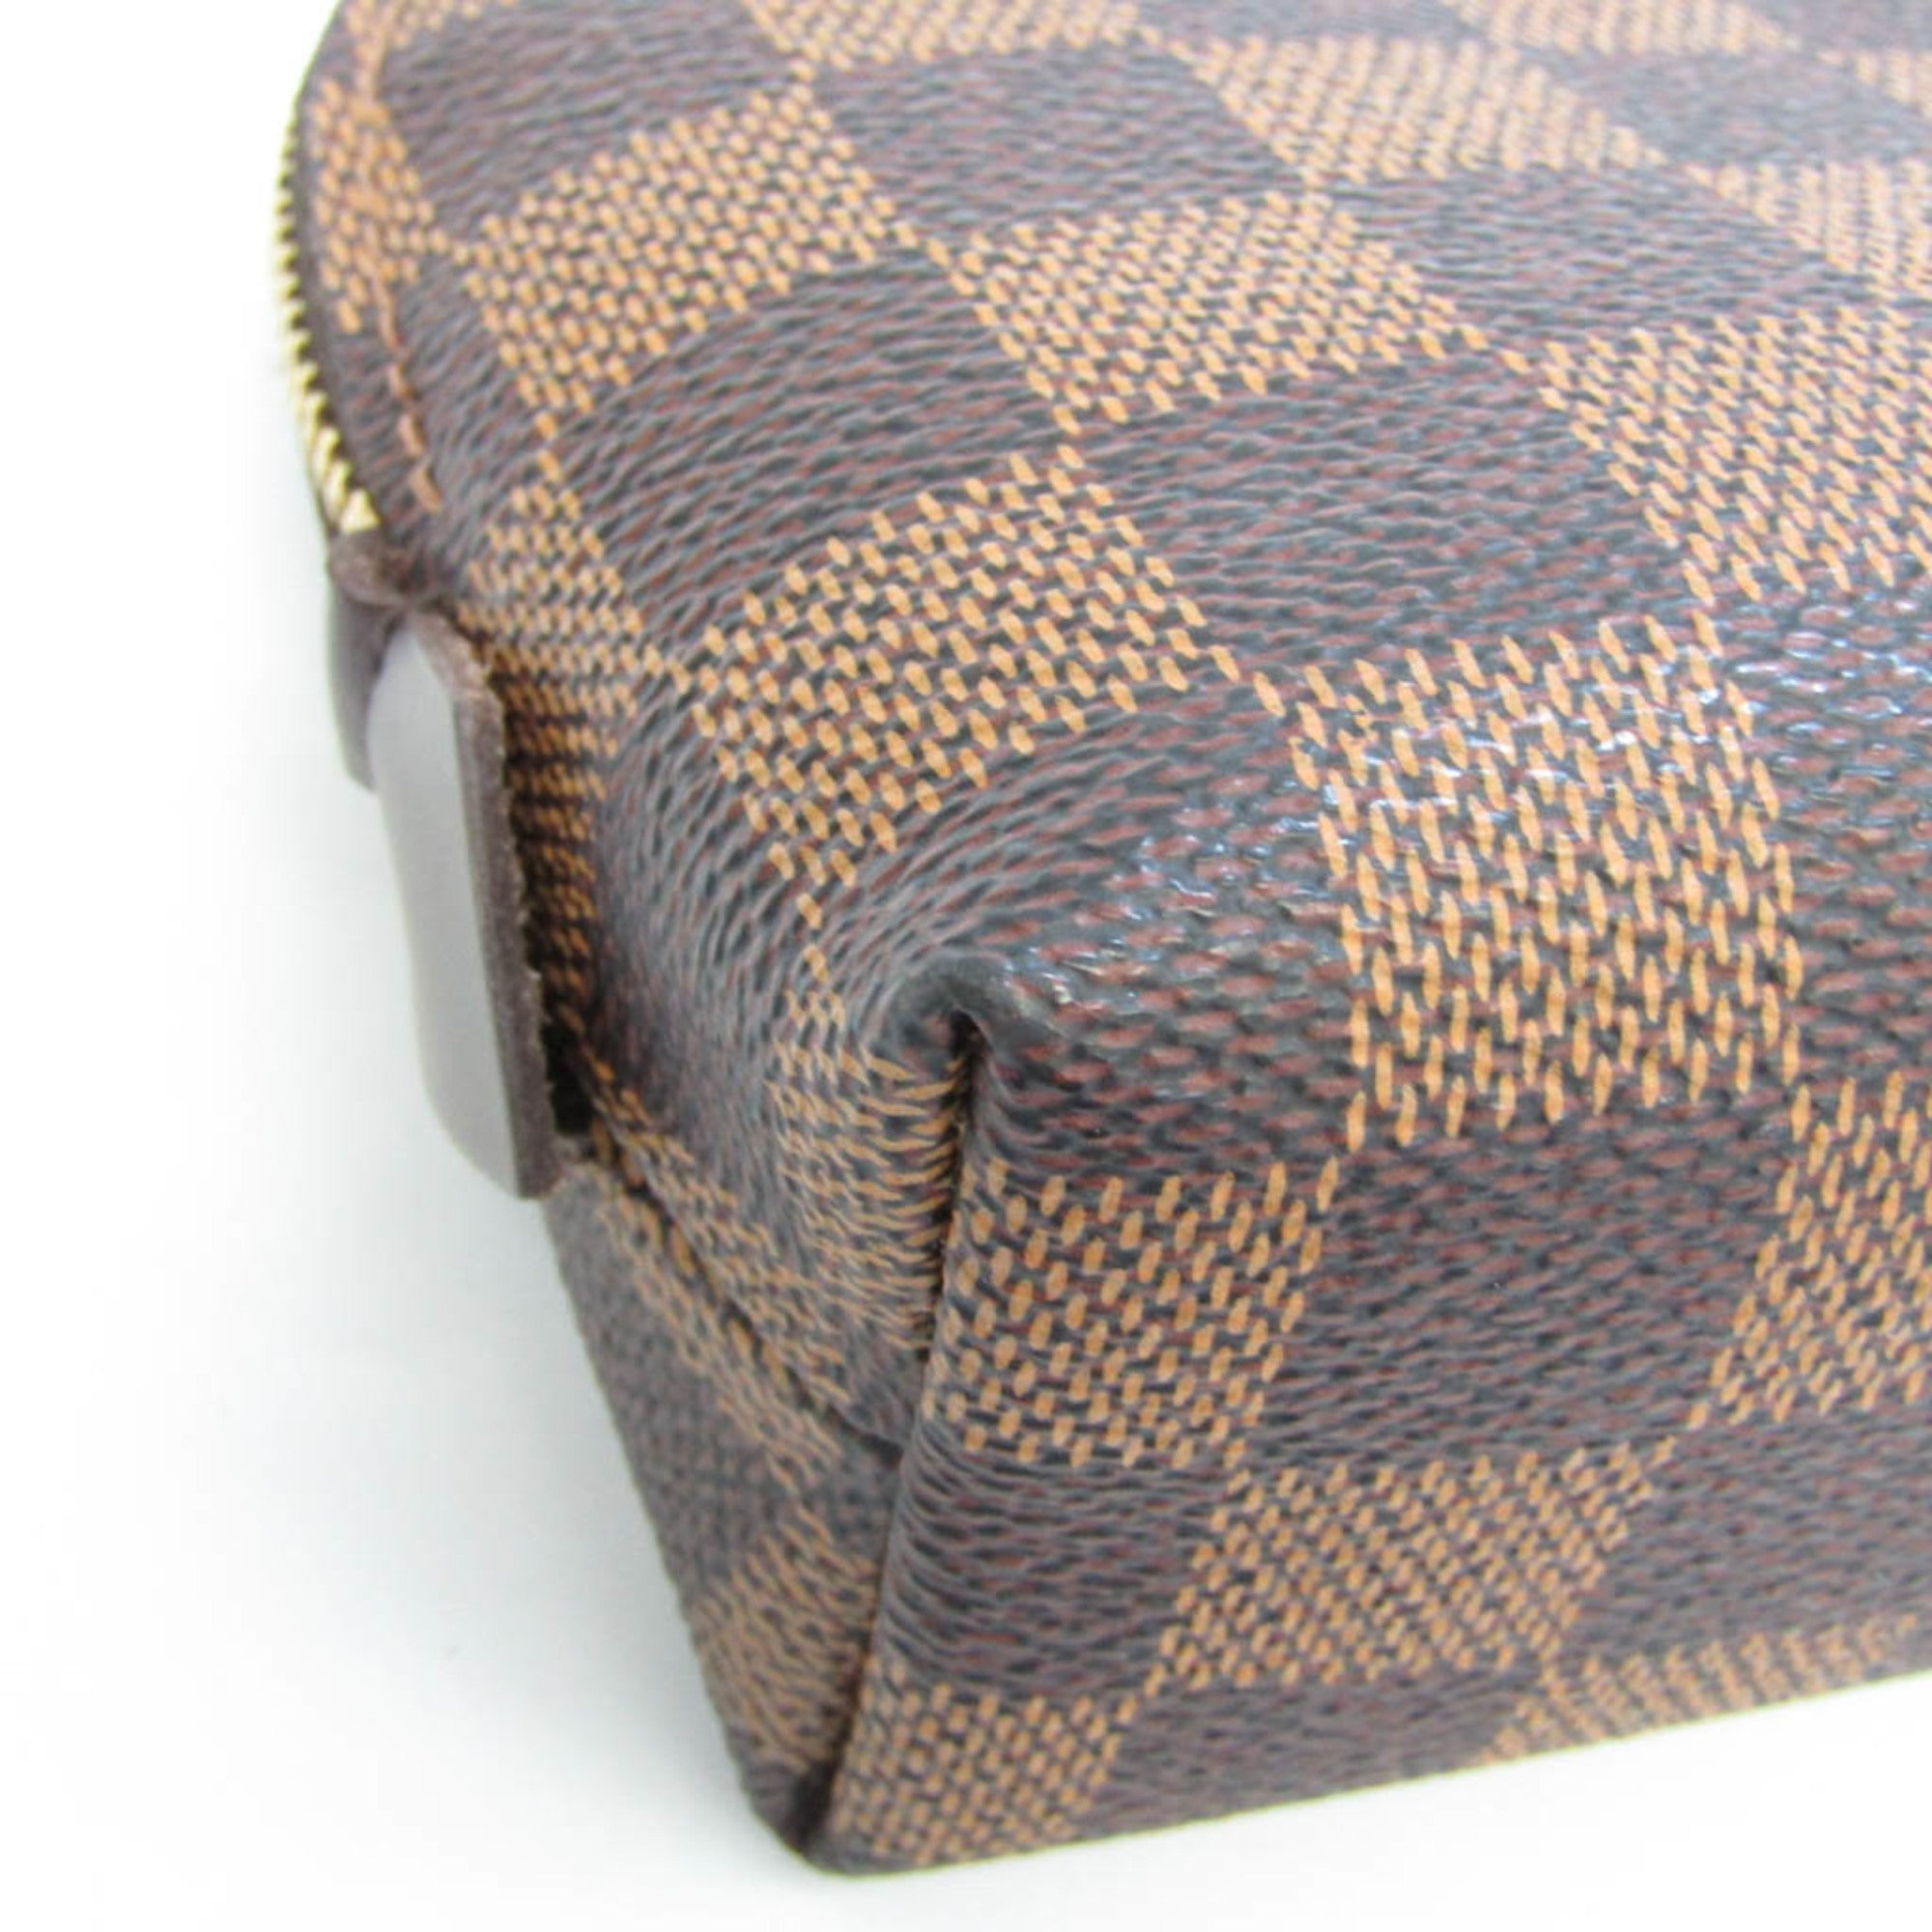 Authenticated Used Louis Vuitton Damier Poche Cosmetic N47516 Women's Pouch  Ebene 